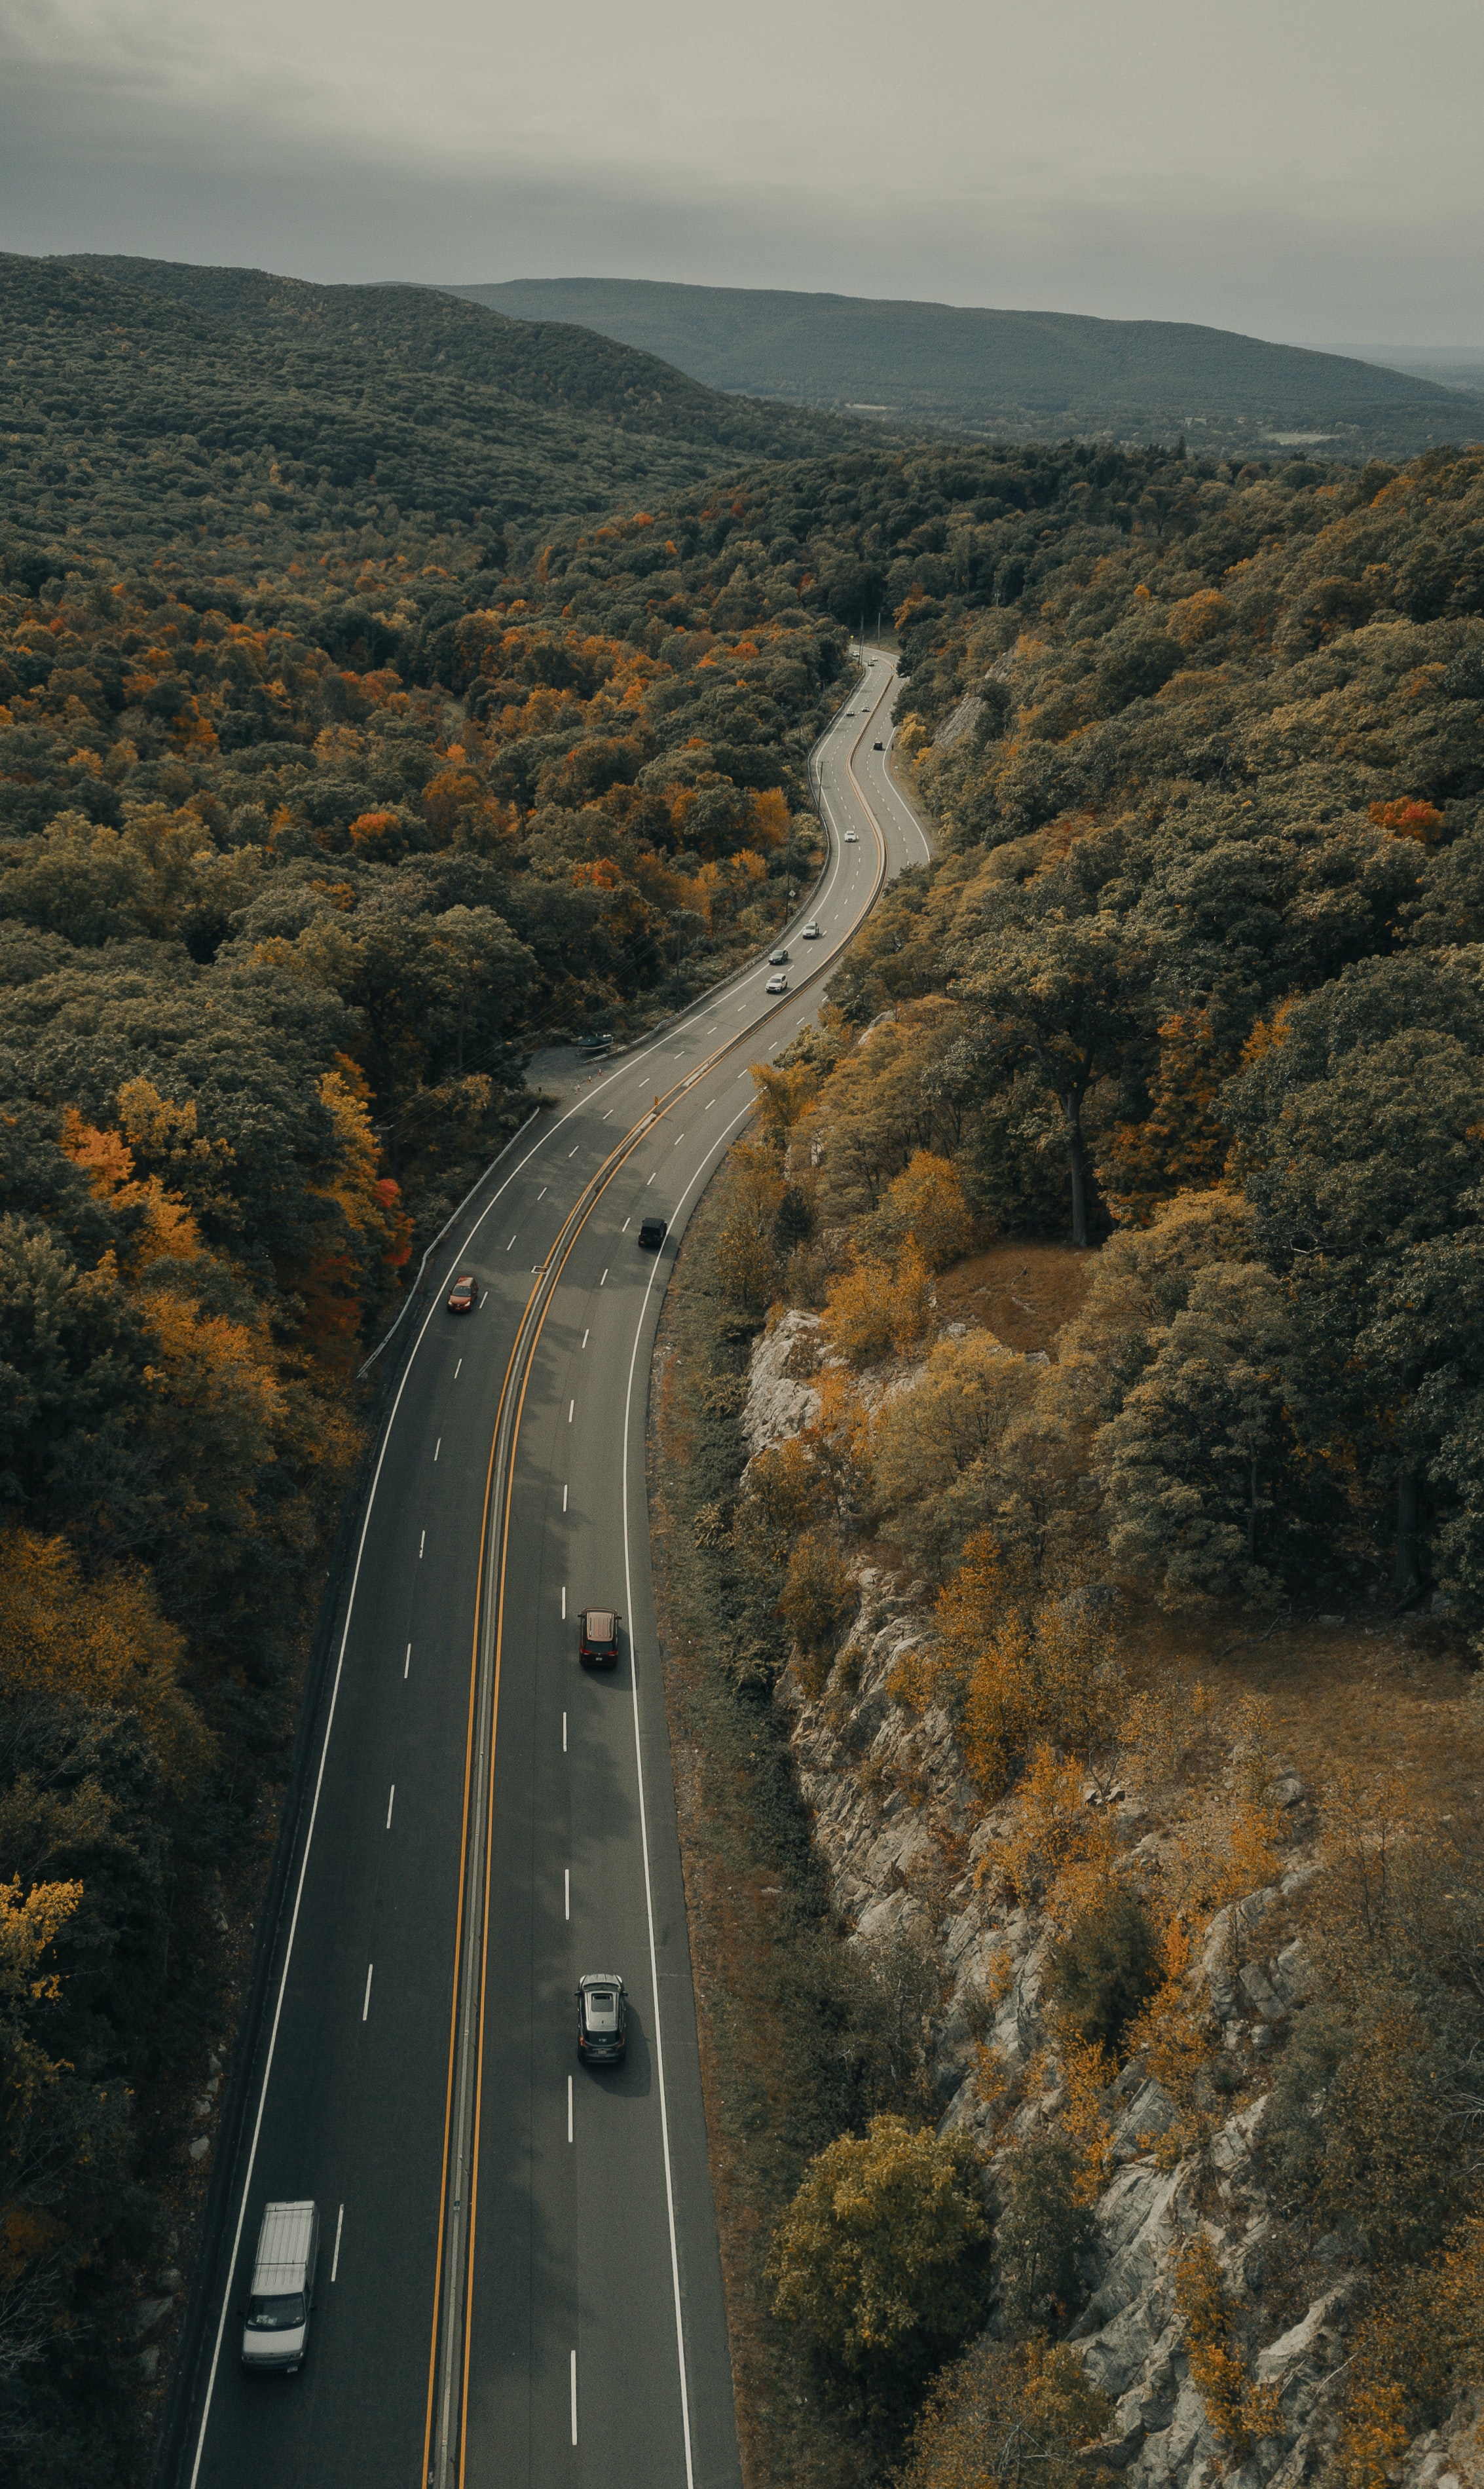 PC Wallpapers road, nature, autumn, auto, trees, forest